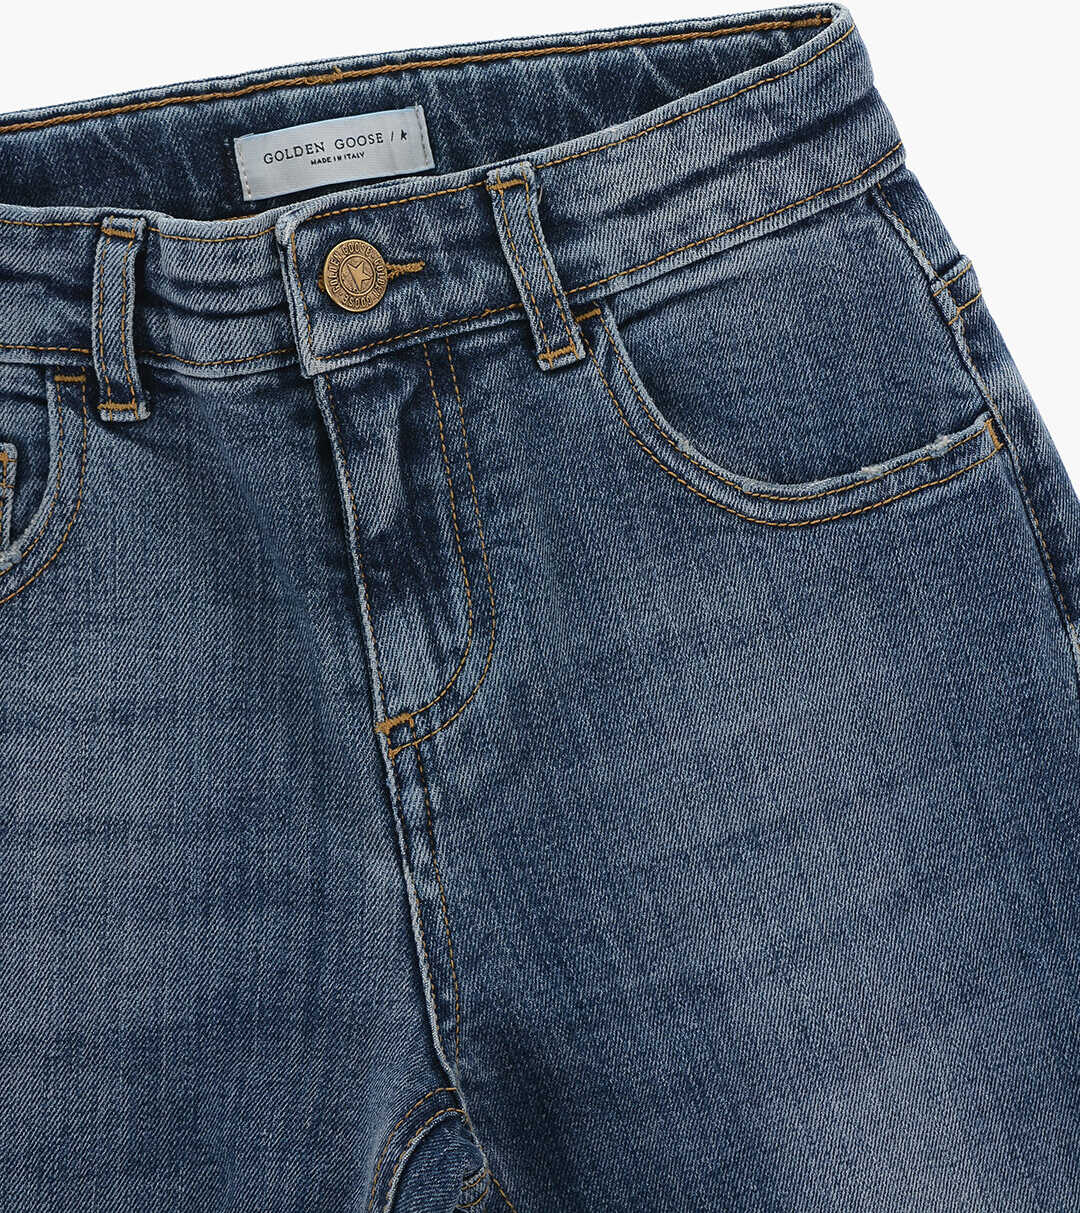 GOLDEN GOOSE KIDS Stretch Denim Jeans With Visible Stitching Blue